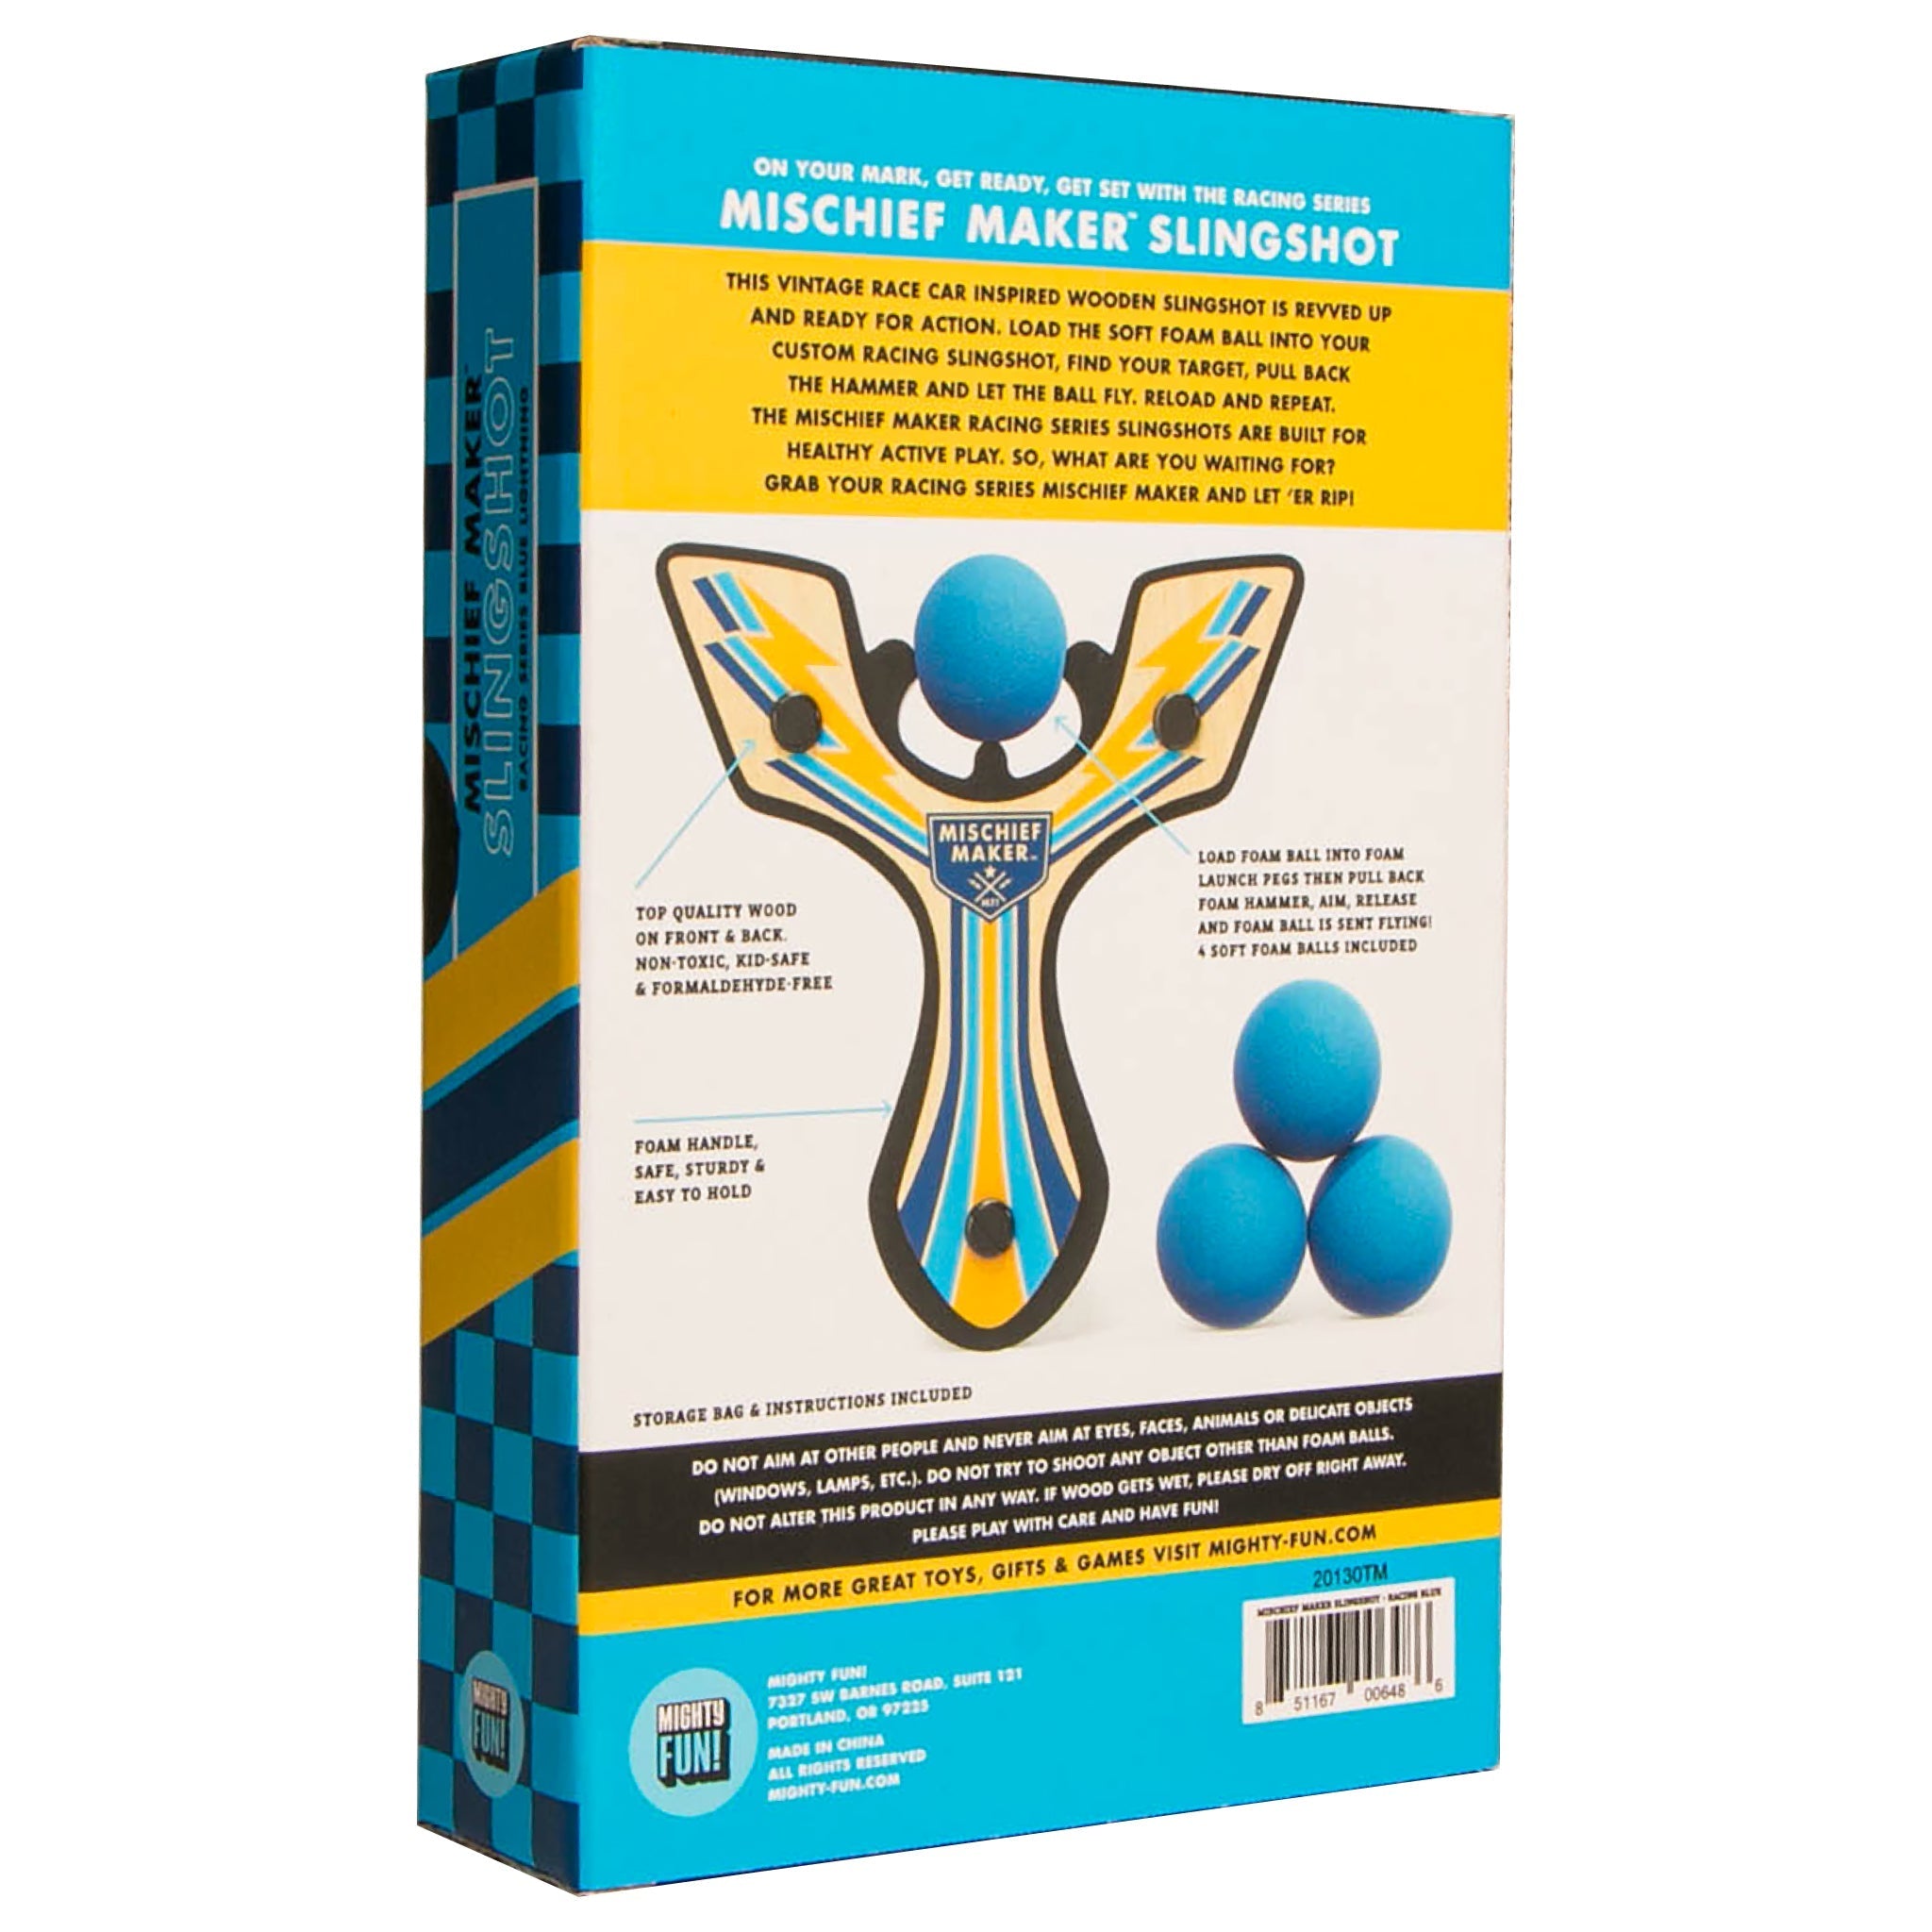 Blue Racing best slingshot color kids gift box. Mischief Maker by Mighty Fun!